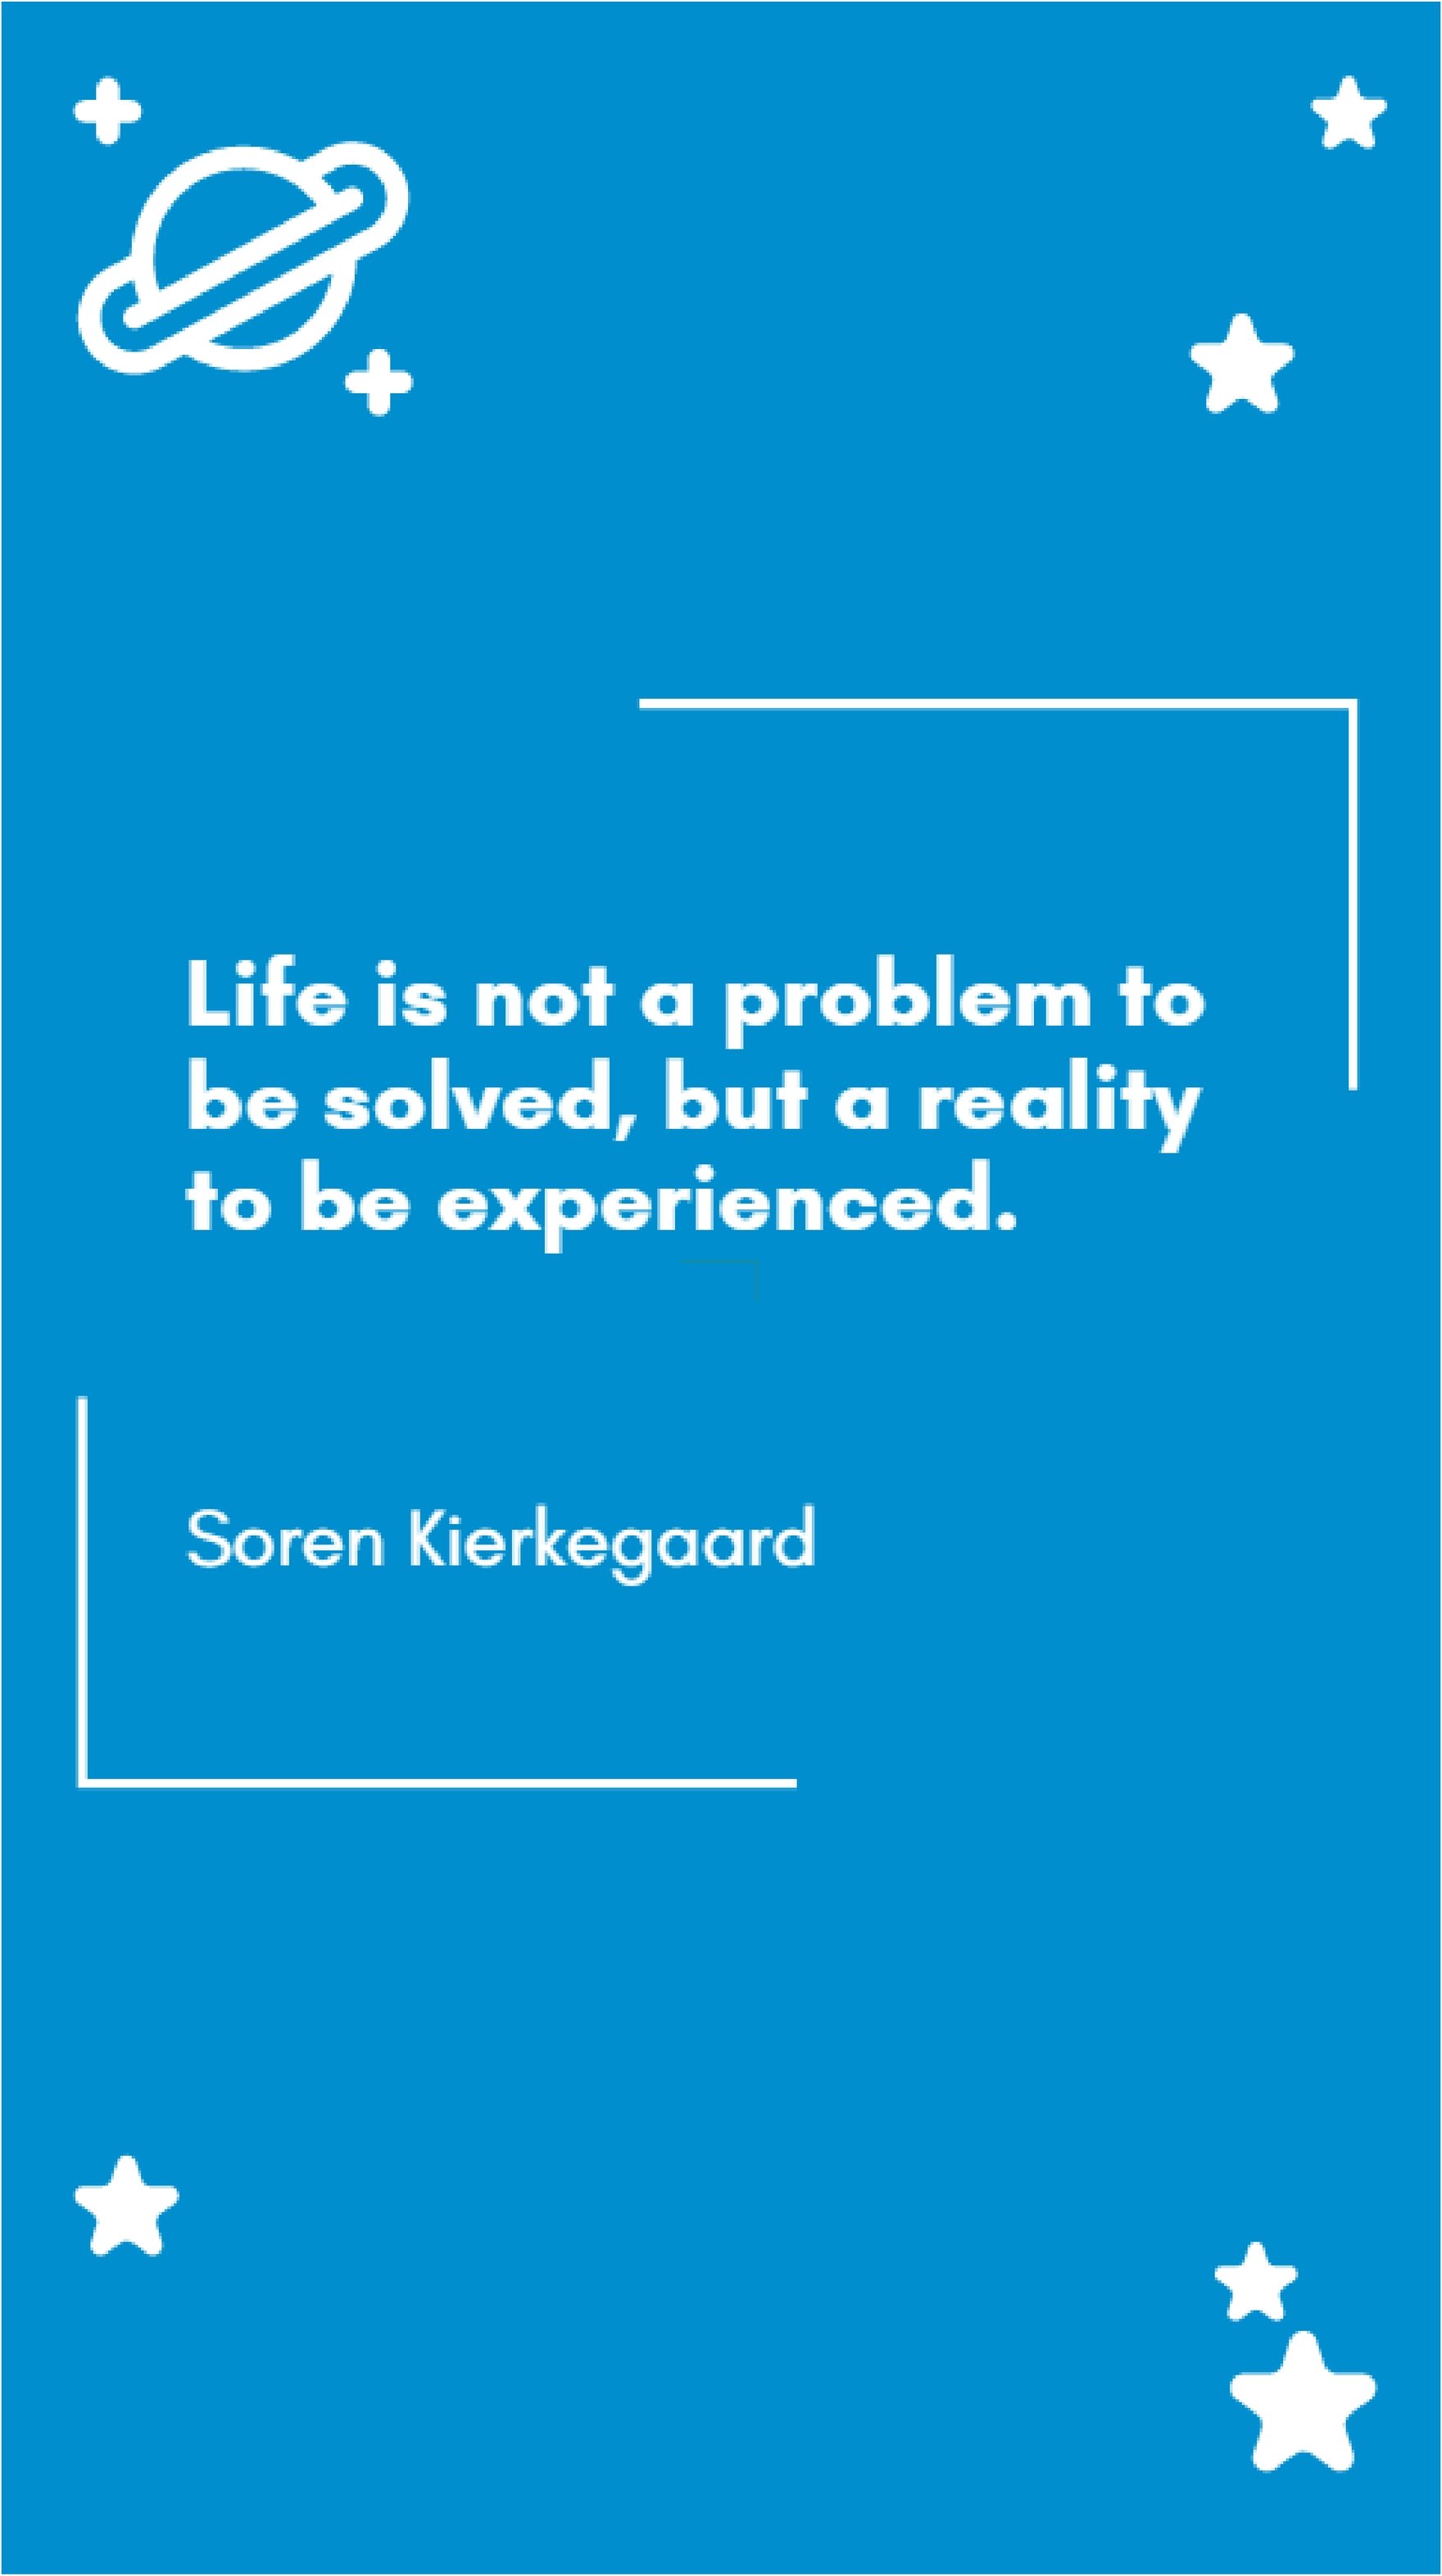 Soren Kierkegaard - Life is not a problem to be solved, but a reality to be experienced